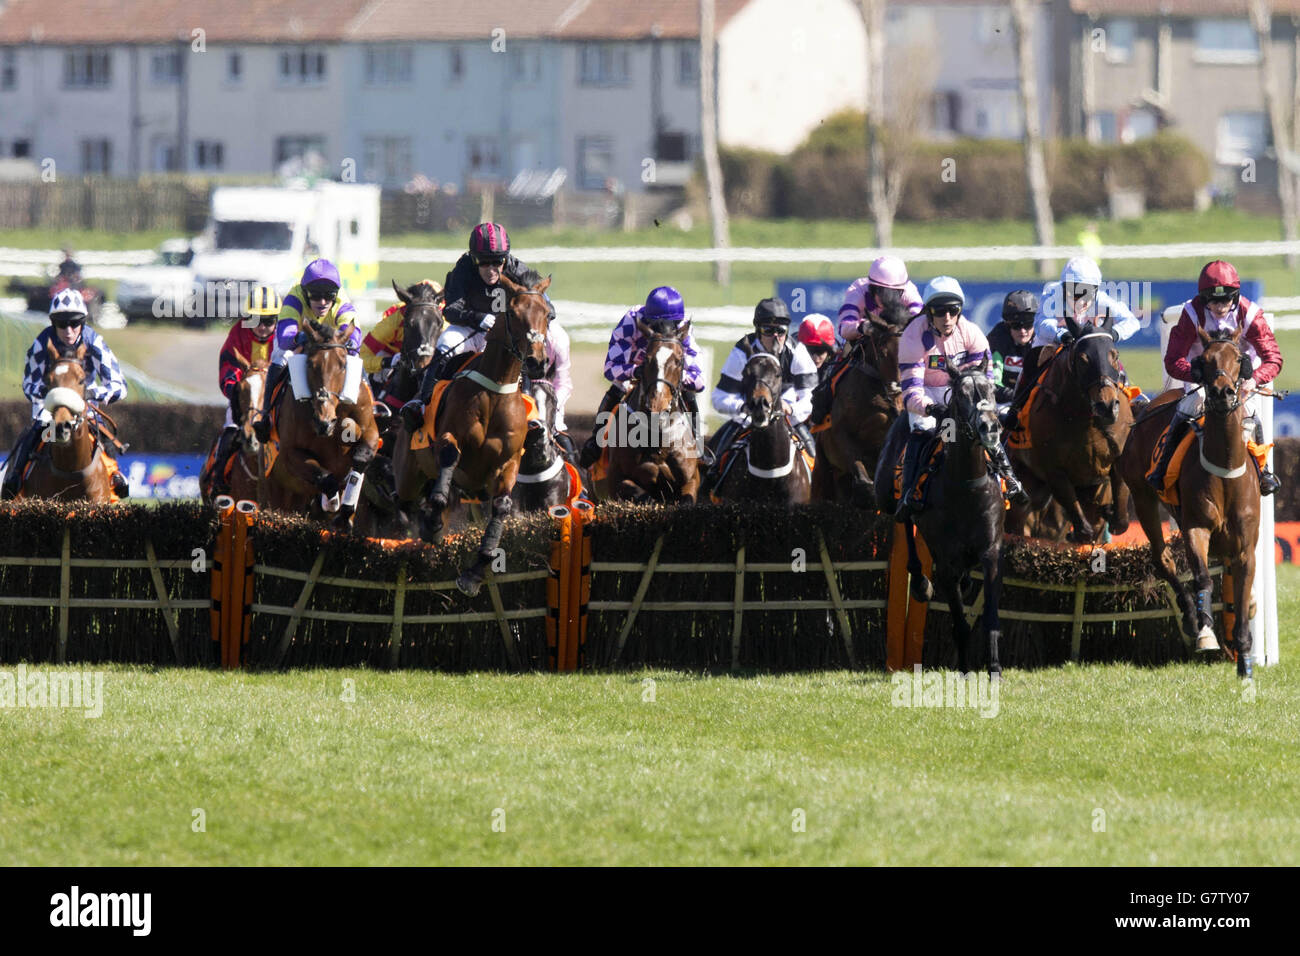 Horse Racing - 2015 Coral Scottish Grand National Festival - Day Two - Ayr Racecourse. Runners and riders during the QTS Scottish Champion Hurdle during the 2015 Coral Scottish Grand National Festival at Ayr Racecourse. Stock Photo